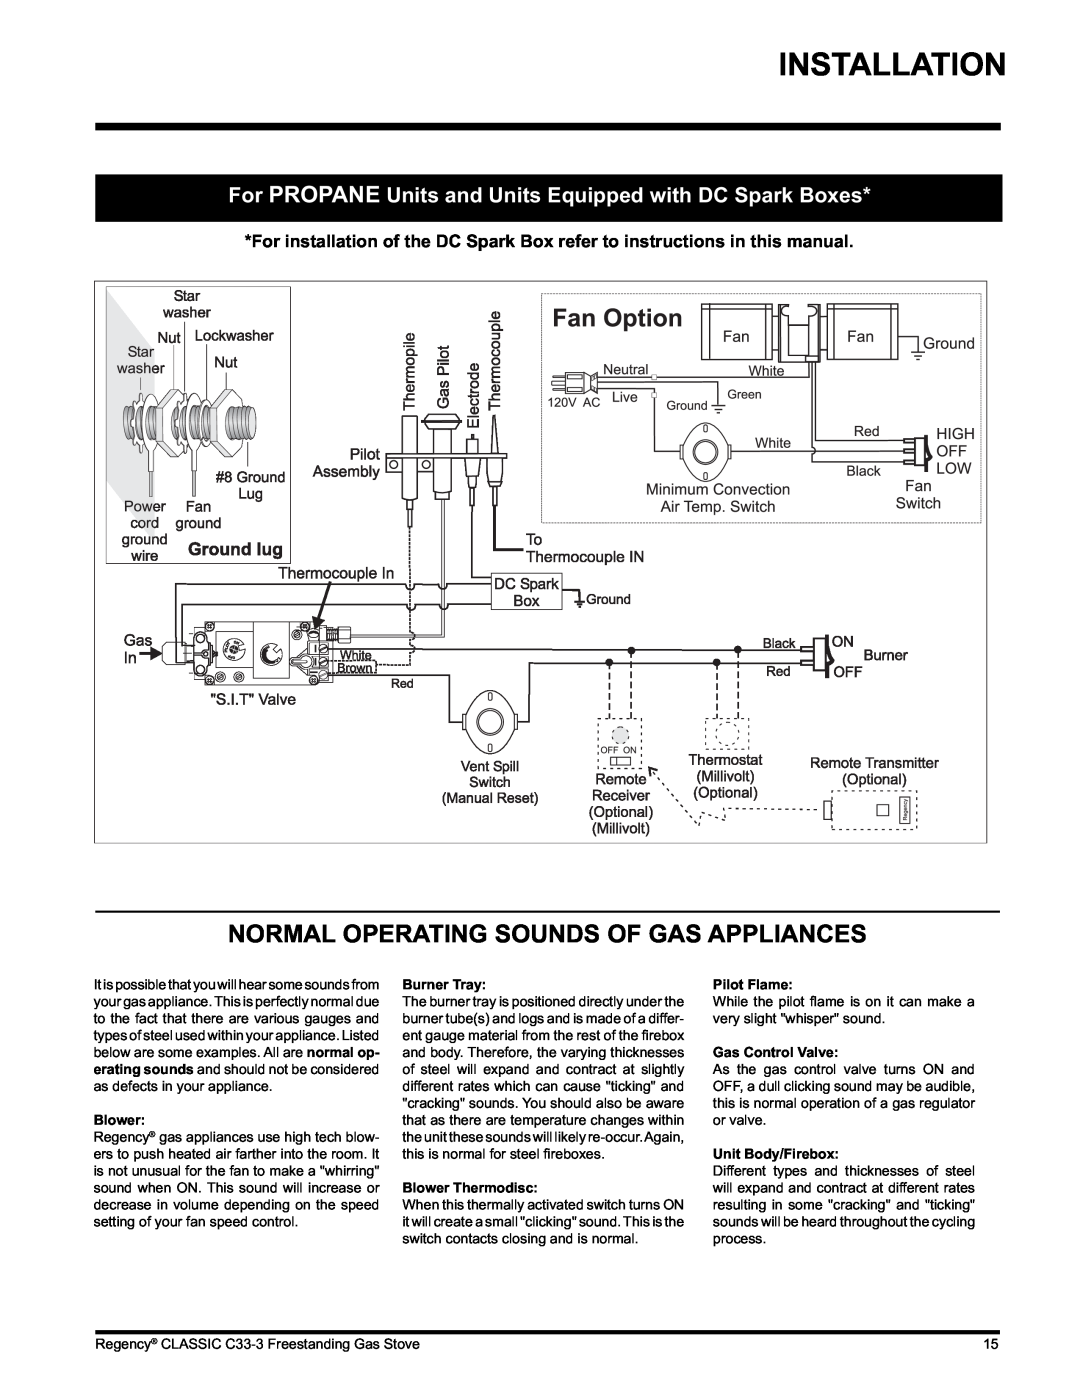 Regency C33-NG3, C33-LP3 Normal Operating Sounds Of Gas Appliances, Burner Tray, Blower Thermodisc, Pilot Flame 